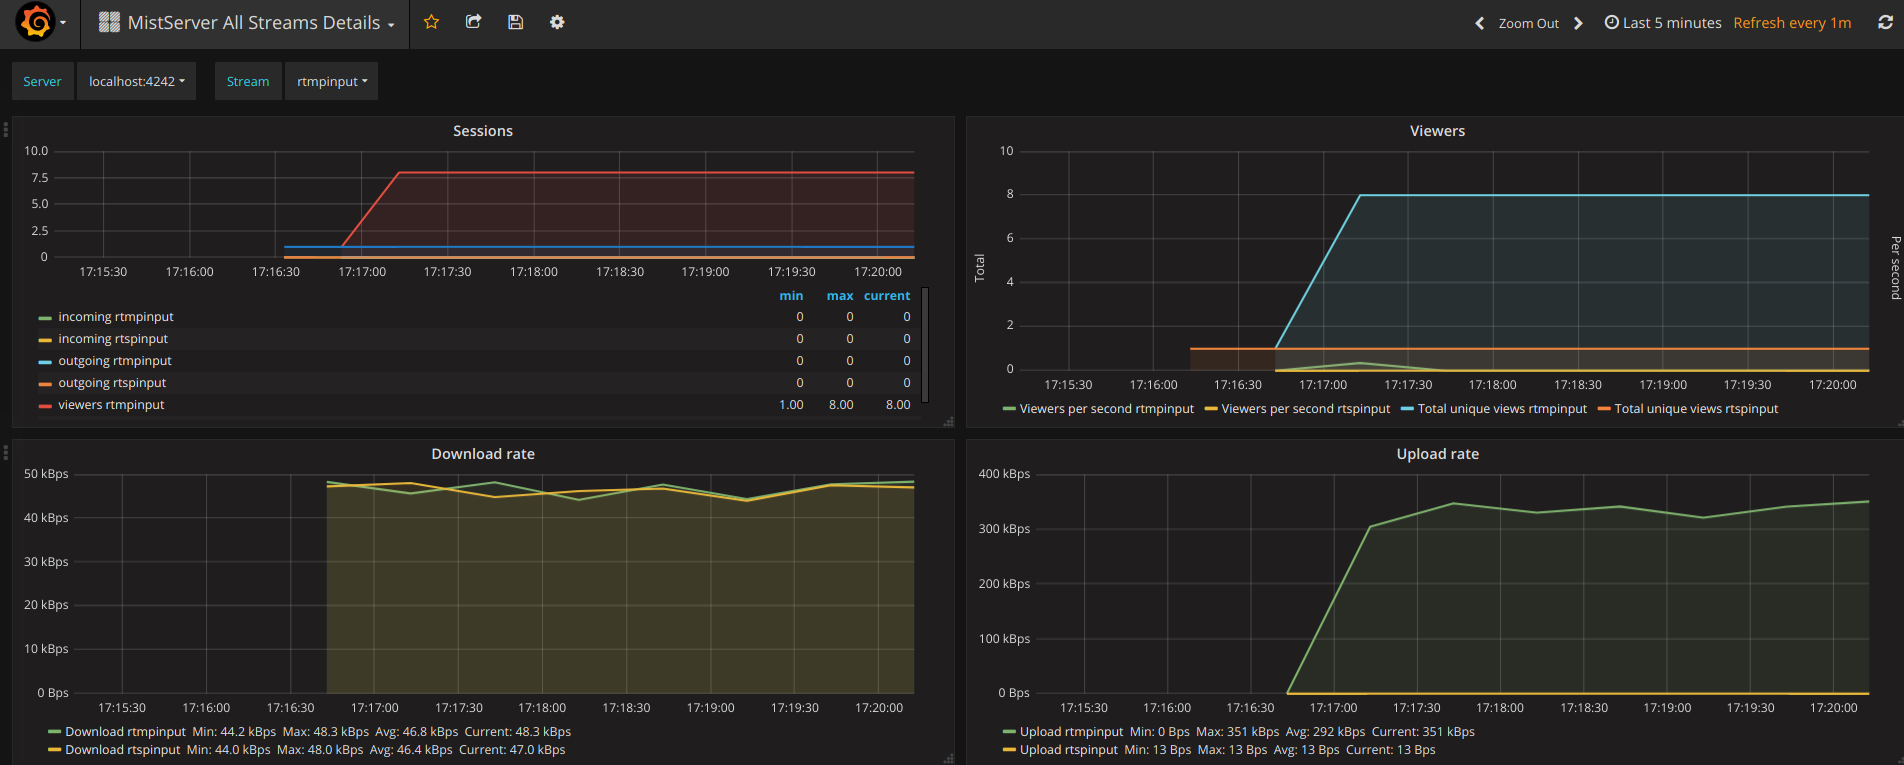 Image of the MistServer All Streams Details Dashboard in grafana